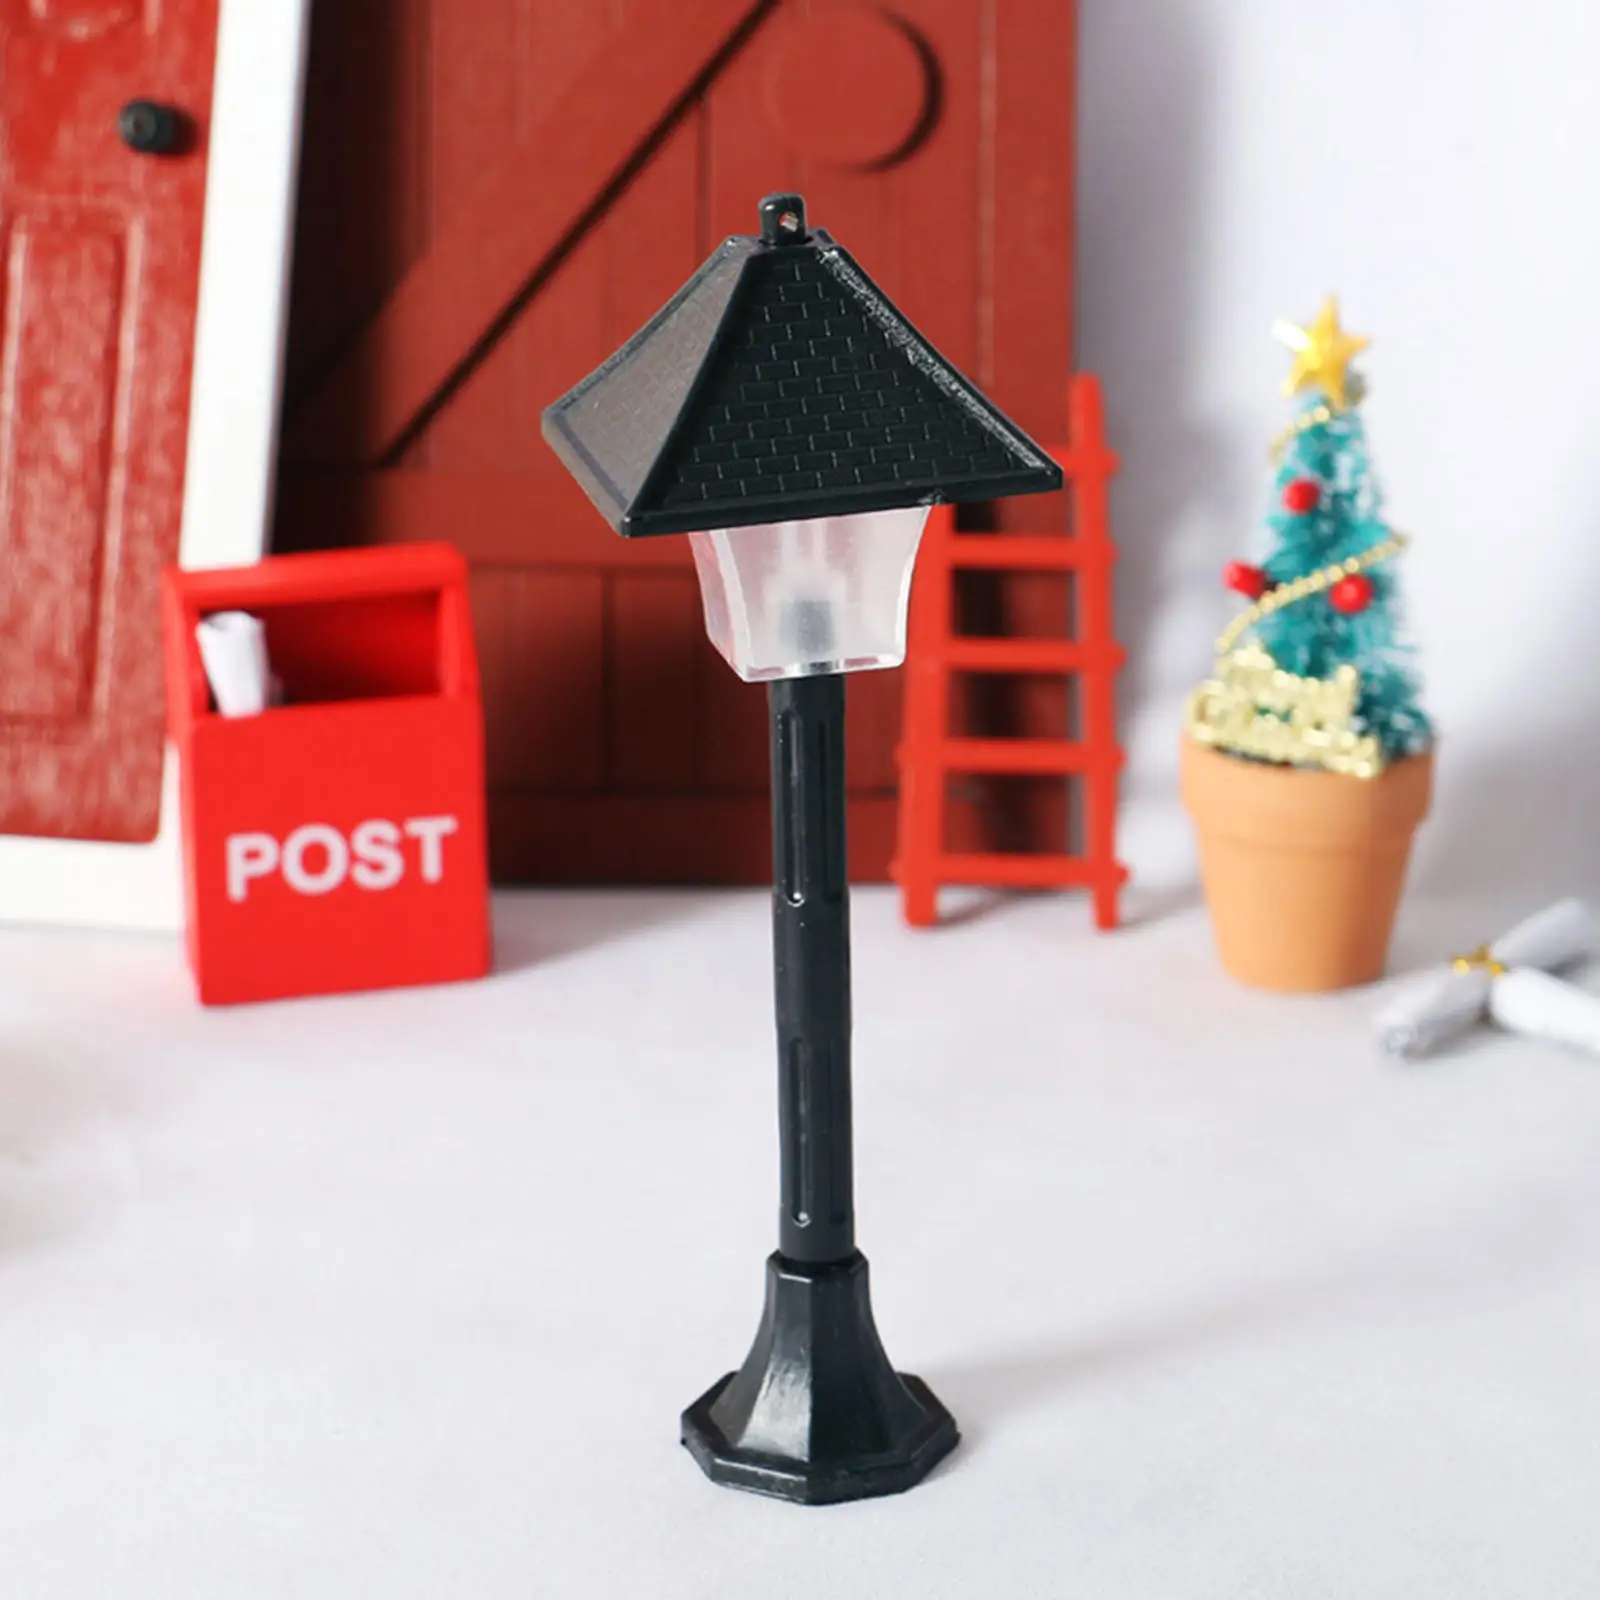 2Pcs Dollhouse Miniature Lamp Post 1:12 Scale Layout Street Light for Garden Micro Landscaping Pathway Decoration Accessories